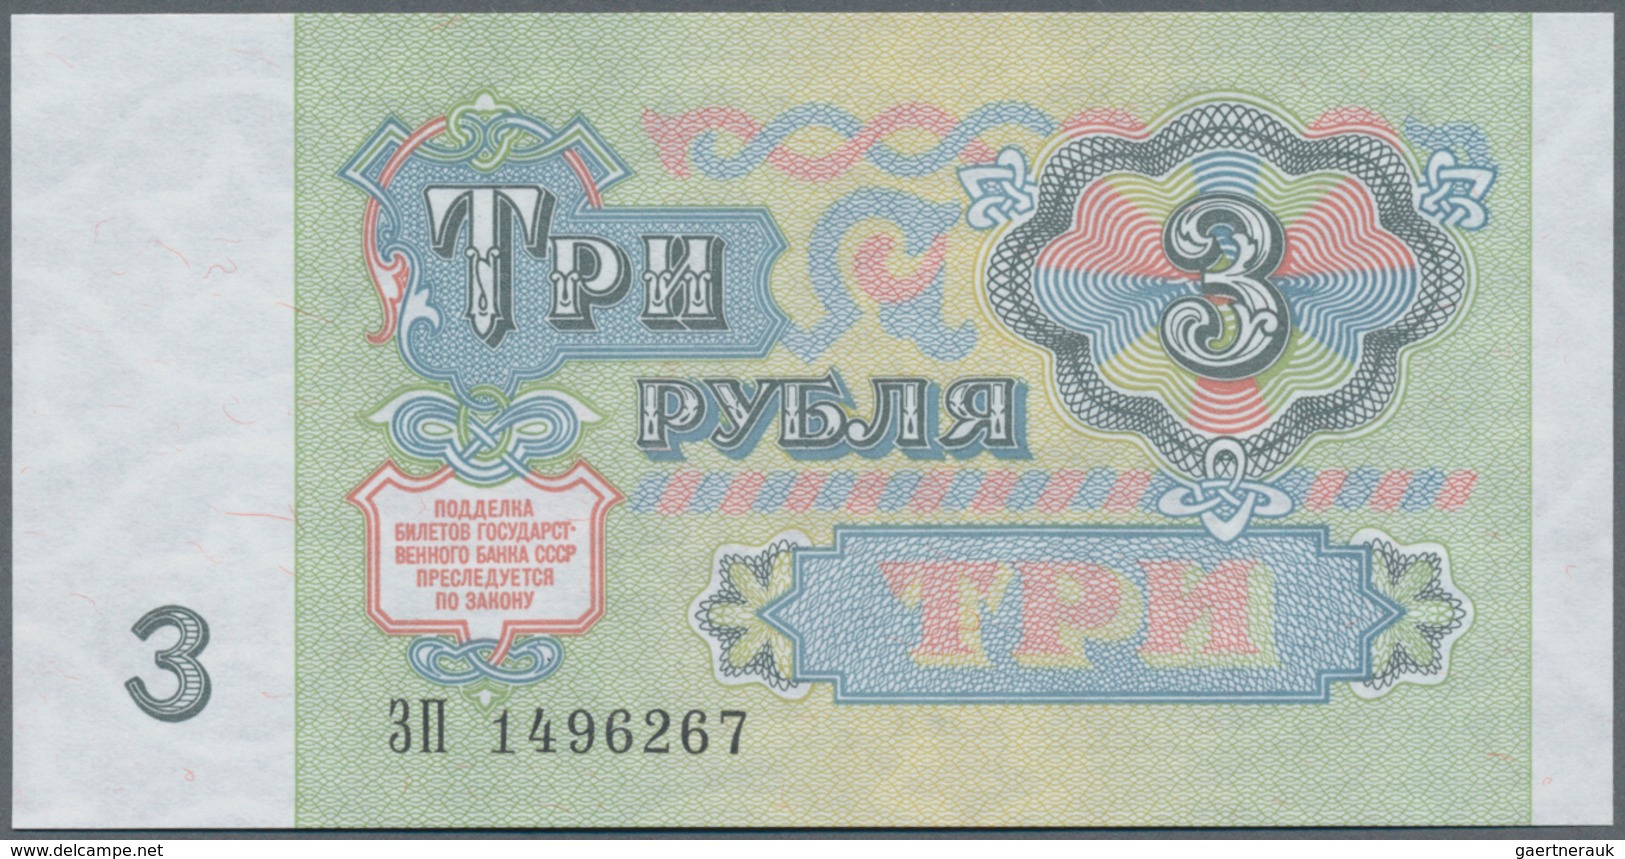 Russia / Russland: Set with 21 Banknotes 1 - 1000 Rubles 1960-1992, P.222-224, 233-250 in VF to UNC